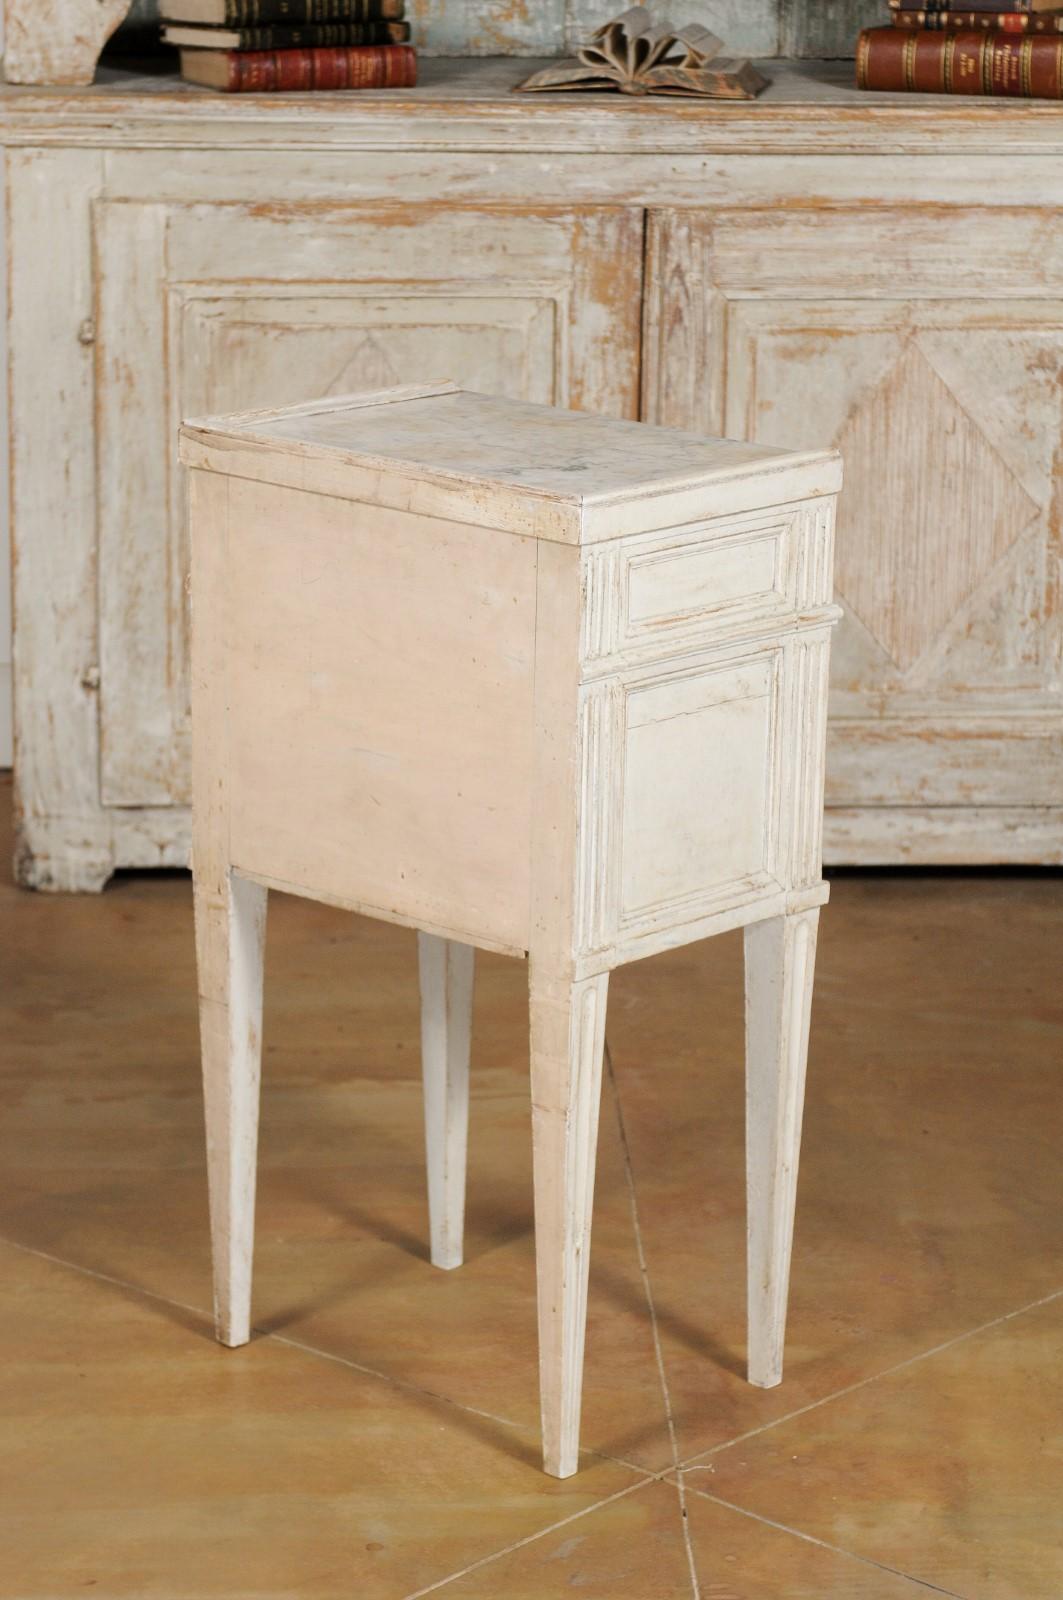 Wood Swedish 19th Century Neoclassical Style Painted Nightstand Table with Marble Top